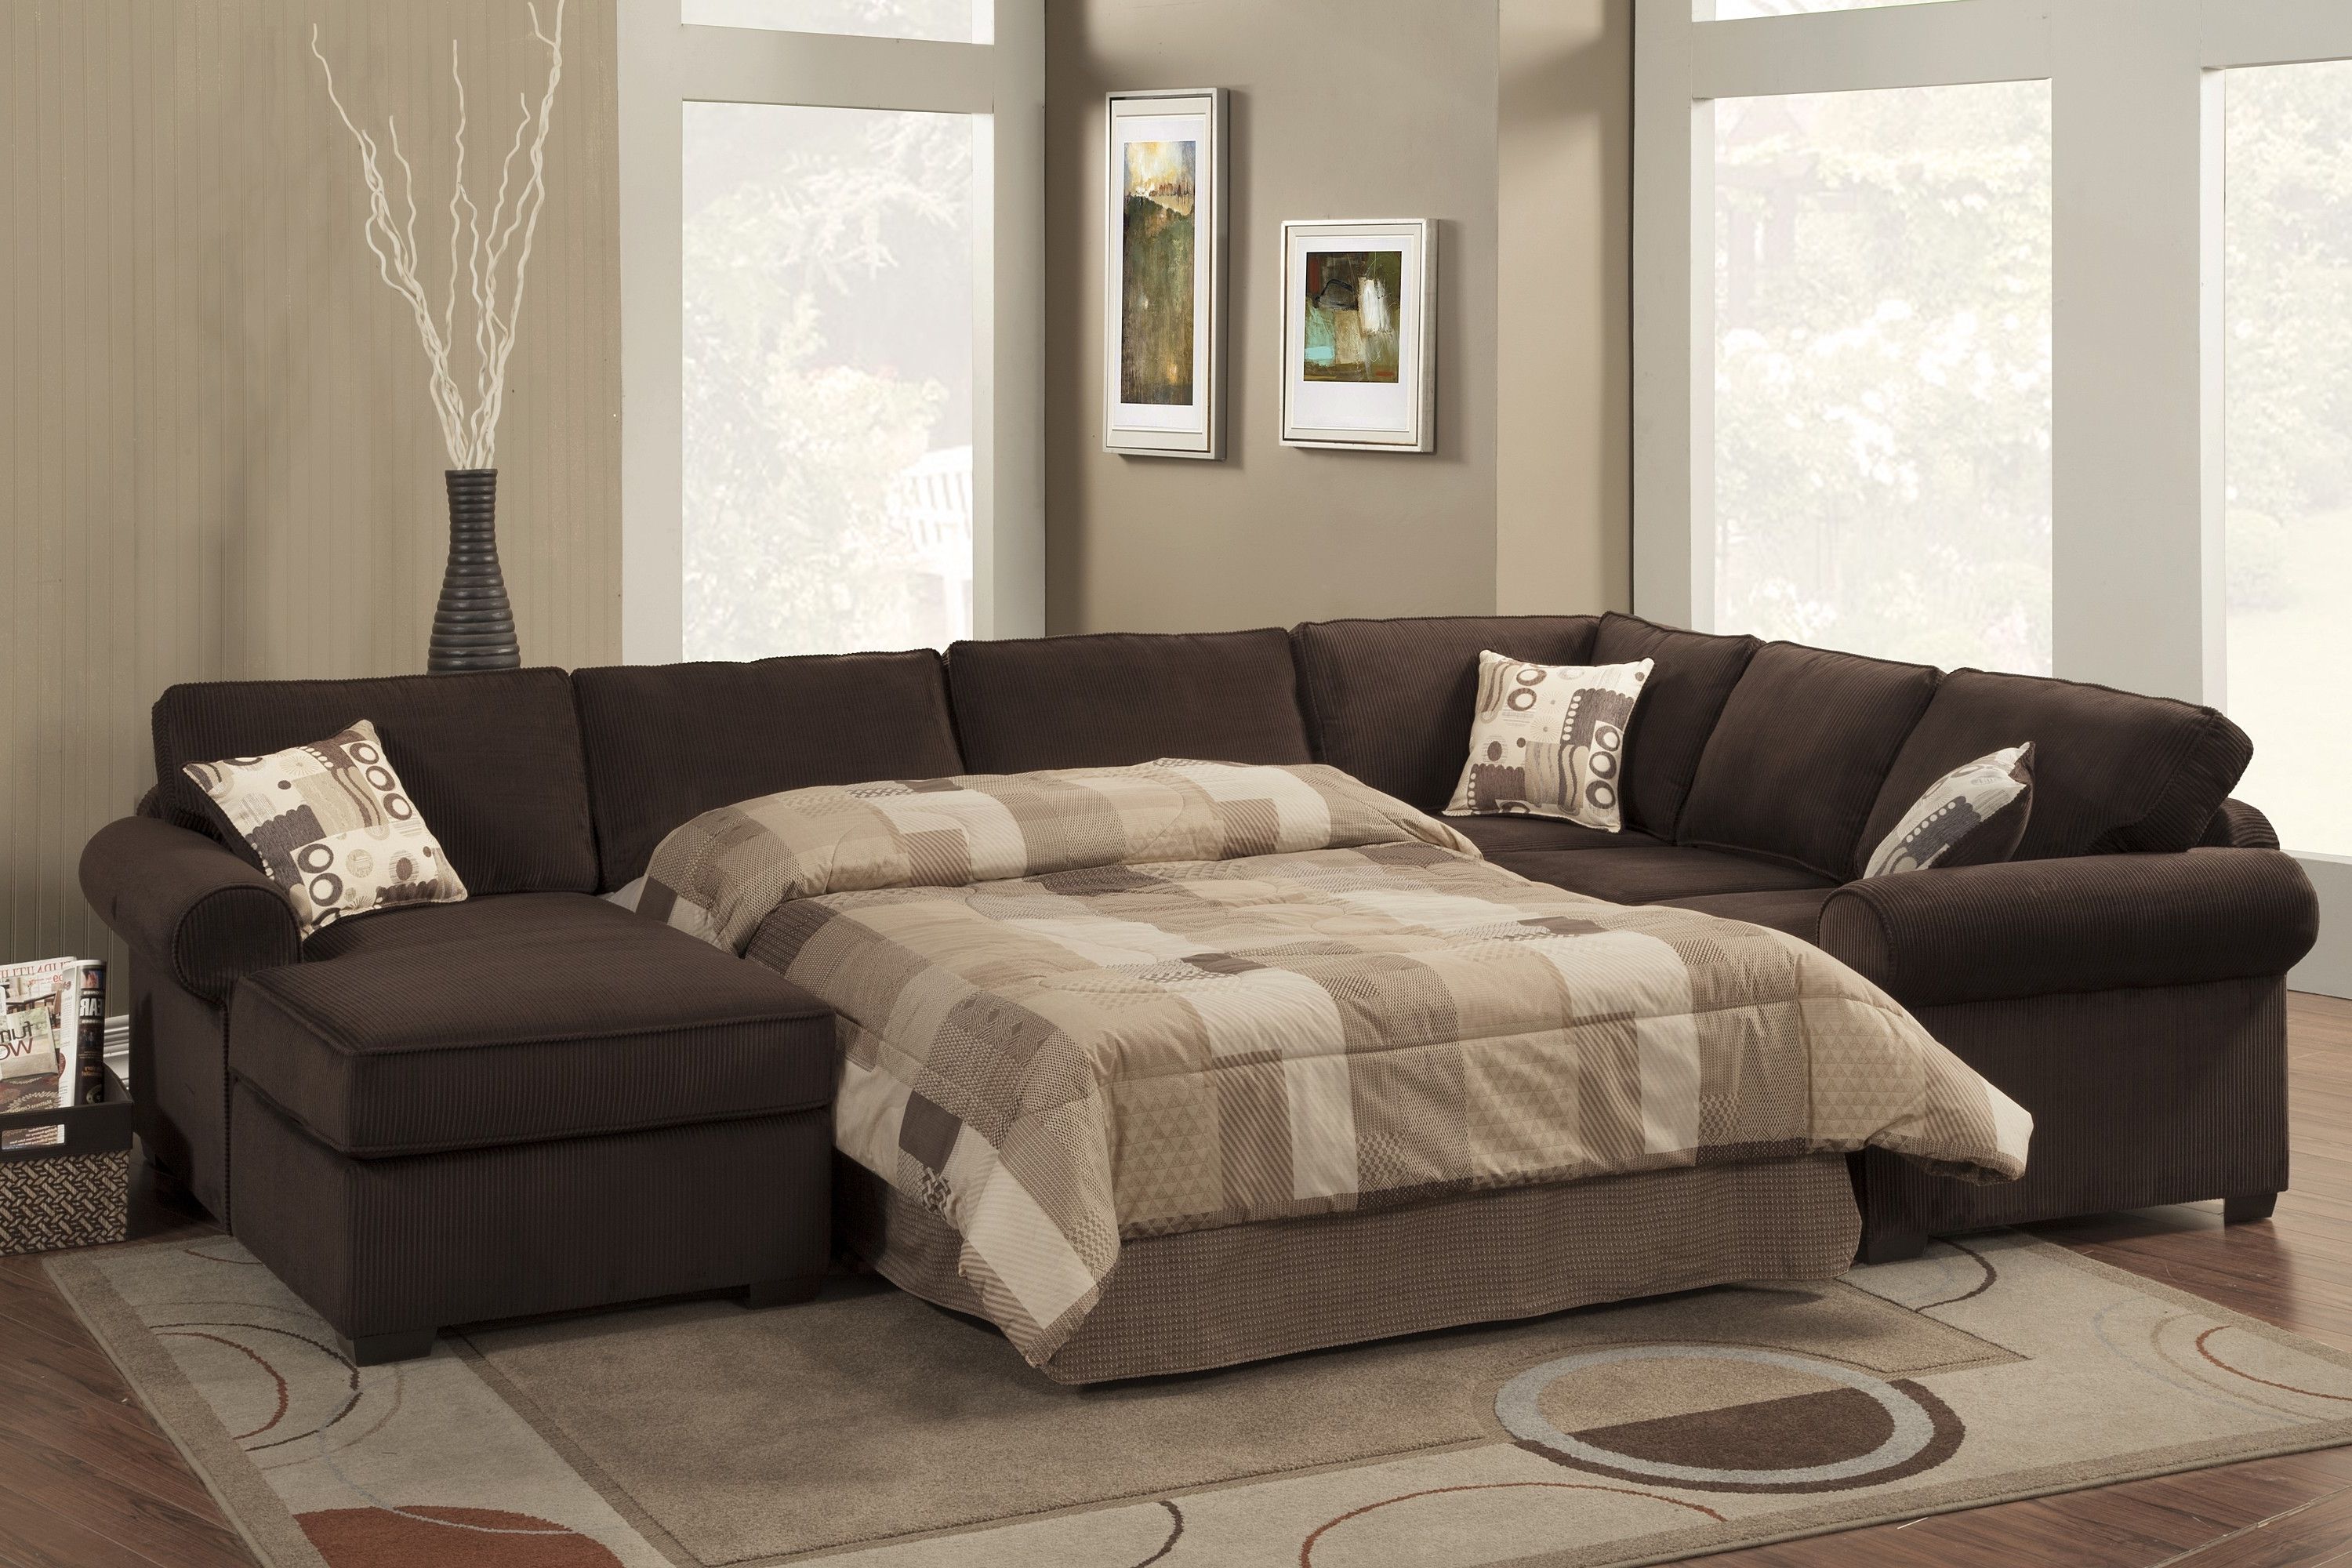 Trend Cozy Sectional Sofas 27 On Sofa Design Ideas With Cozy For Best And Newest Cozy Sectional Sofas (View 1 of 20)